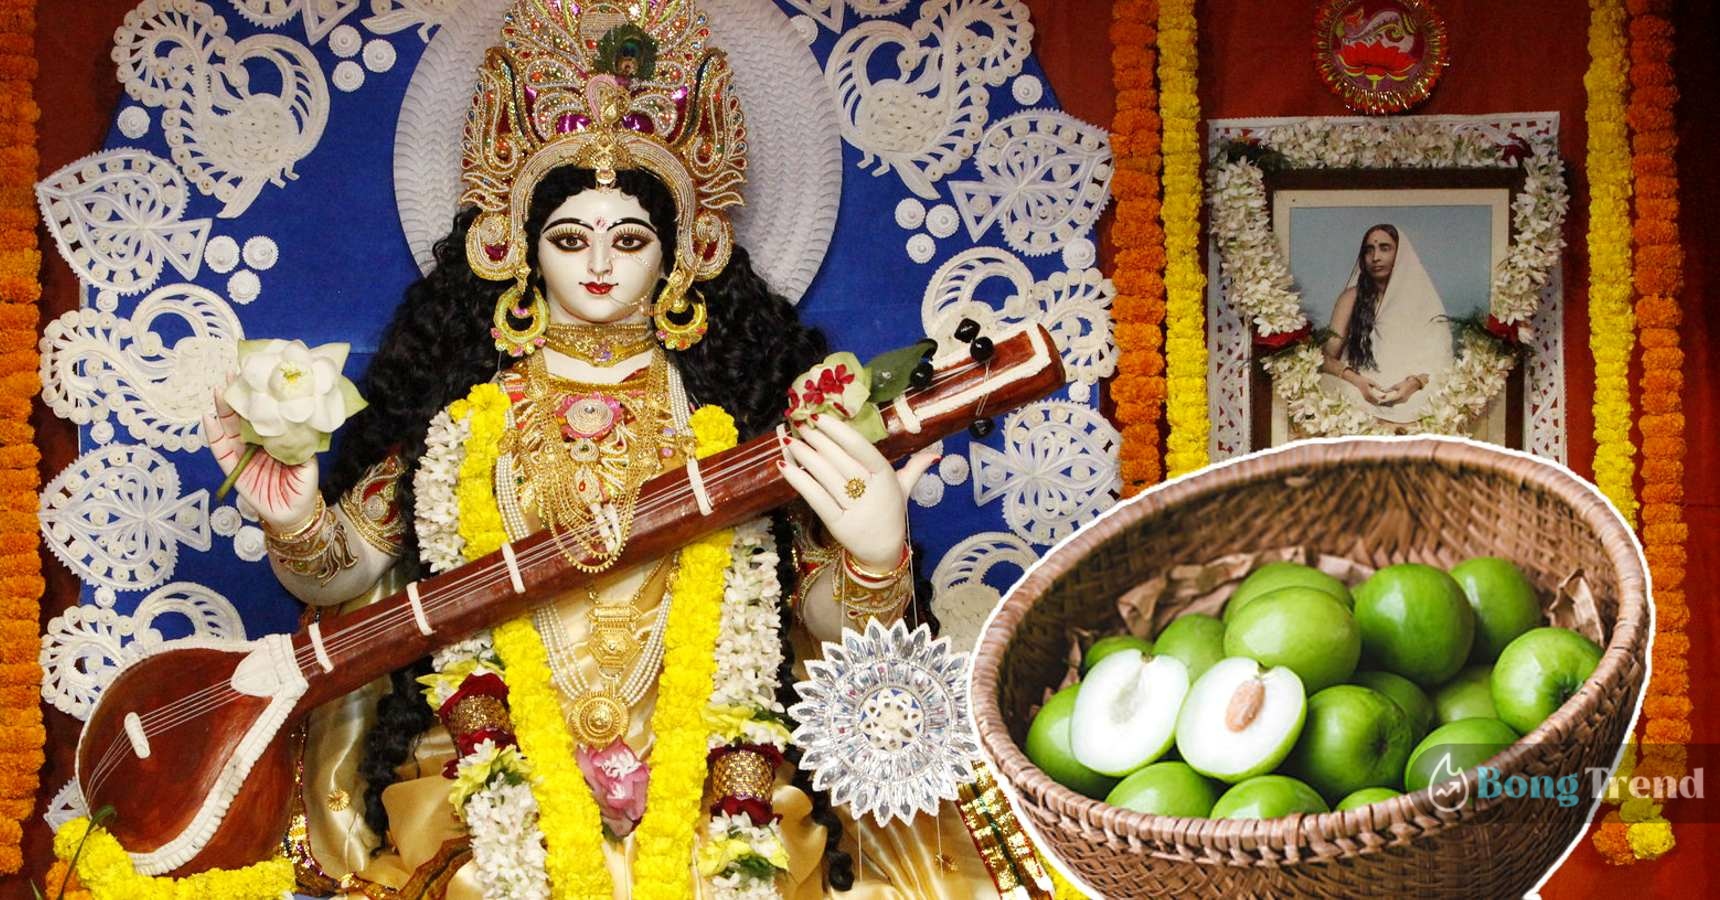 Why eating Jujube Fruits before Saraswati Puja is not allowed